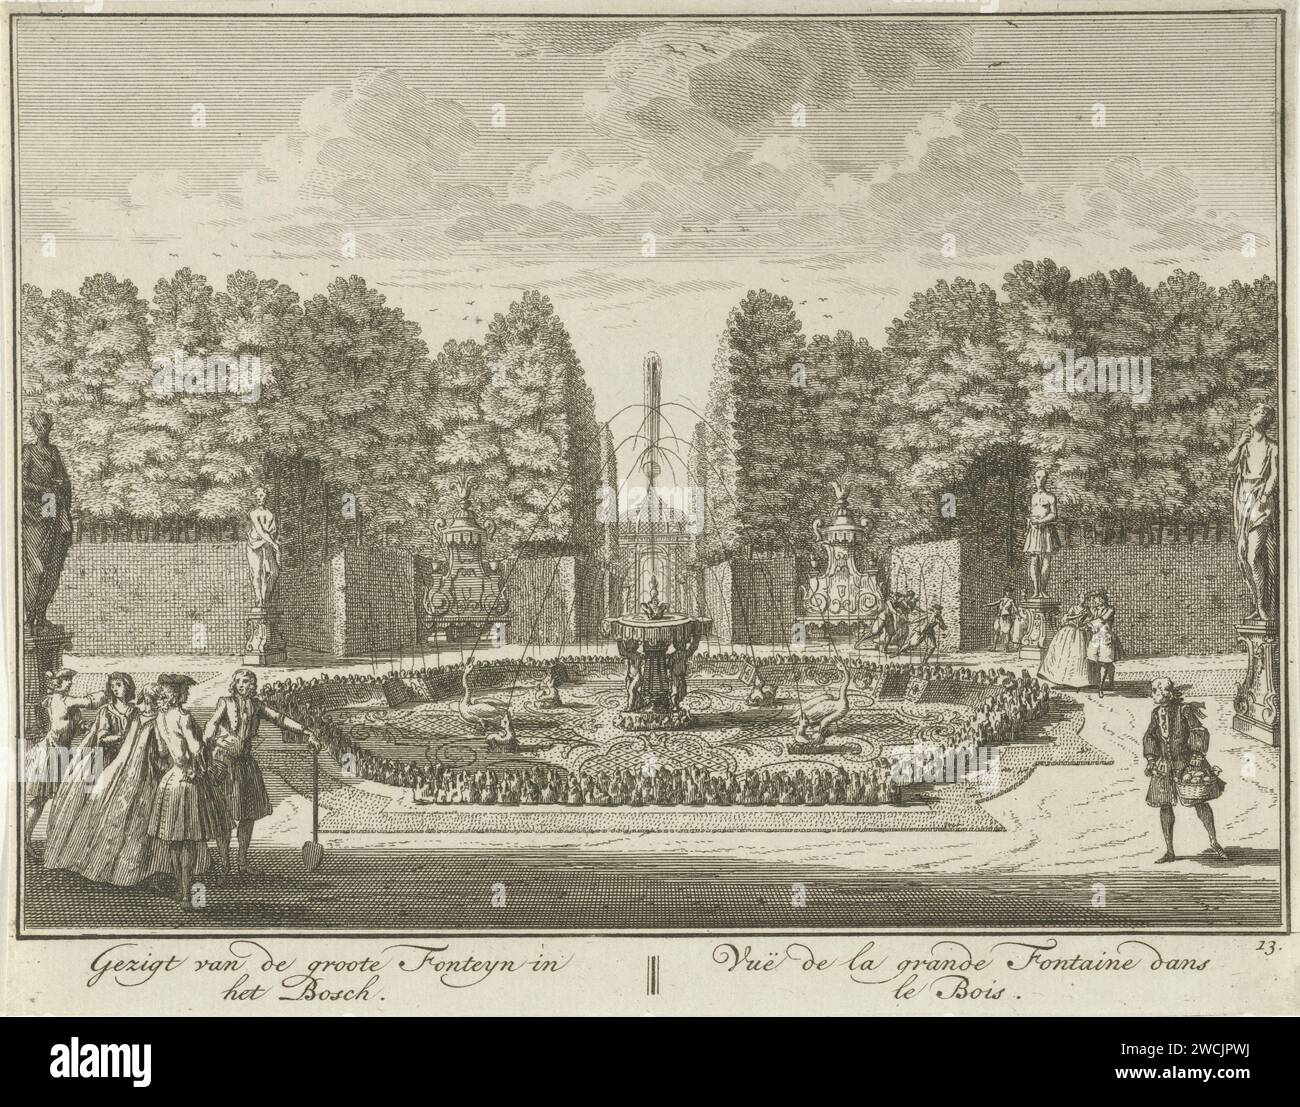 Large fountain in the garden of Huis ter Meer in Maarssen, Hendrik de Leth, c. 1740 print View of the large fountain in the French garden of Huis ter Meer, there are figures all around. The print is part of a series with 26 faces at Huis ter Meer and the accompanying estate in Maarssen.  paper etching country-house. French or architectonic garden; formal garden. garden fountain House Ter Meer Stock Photo